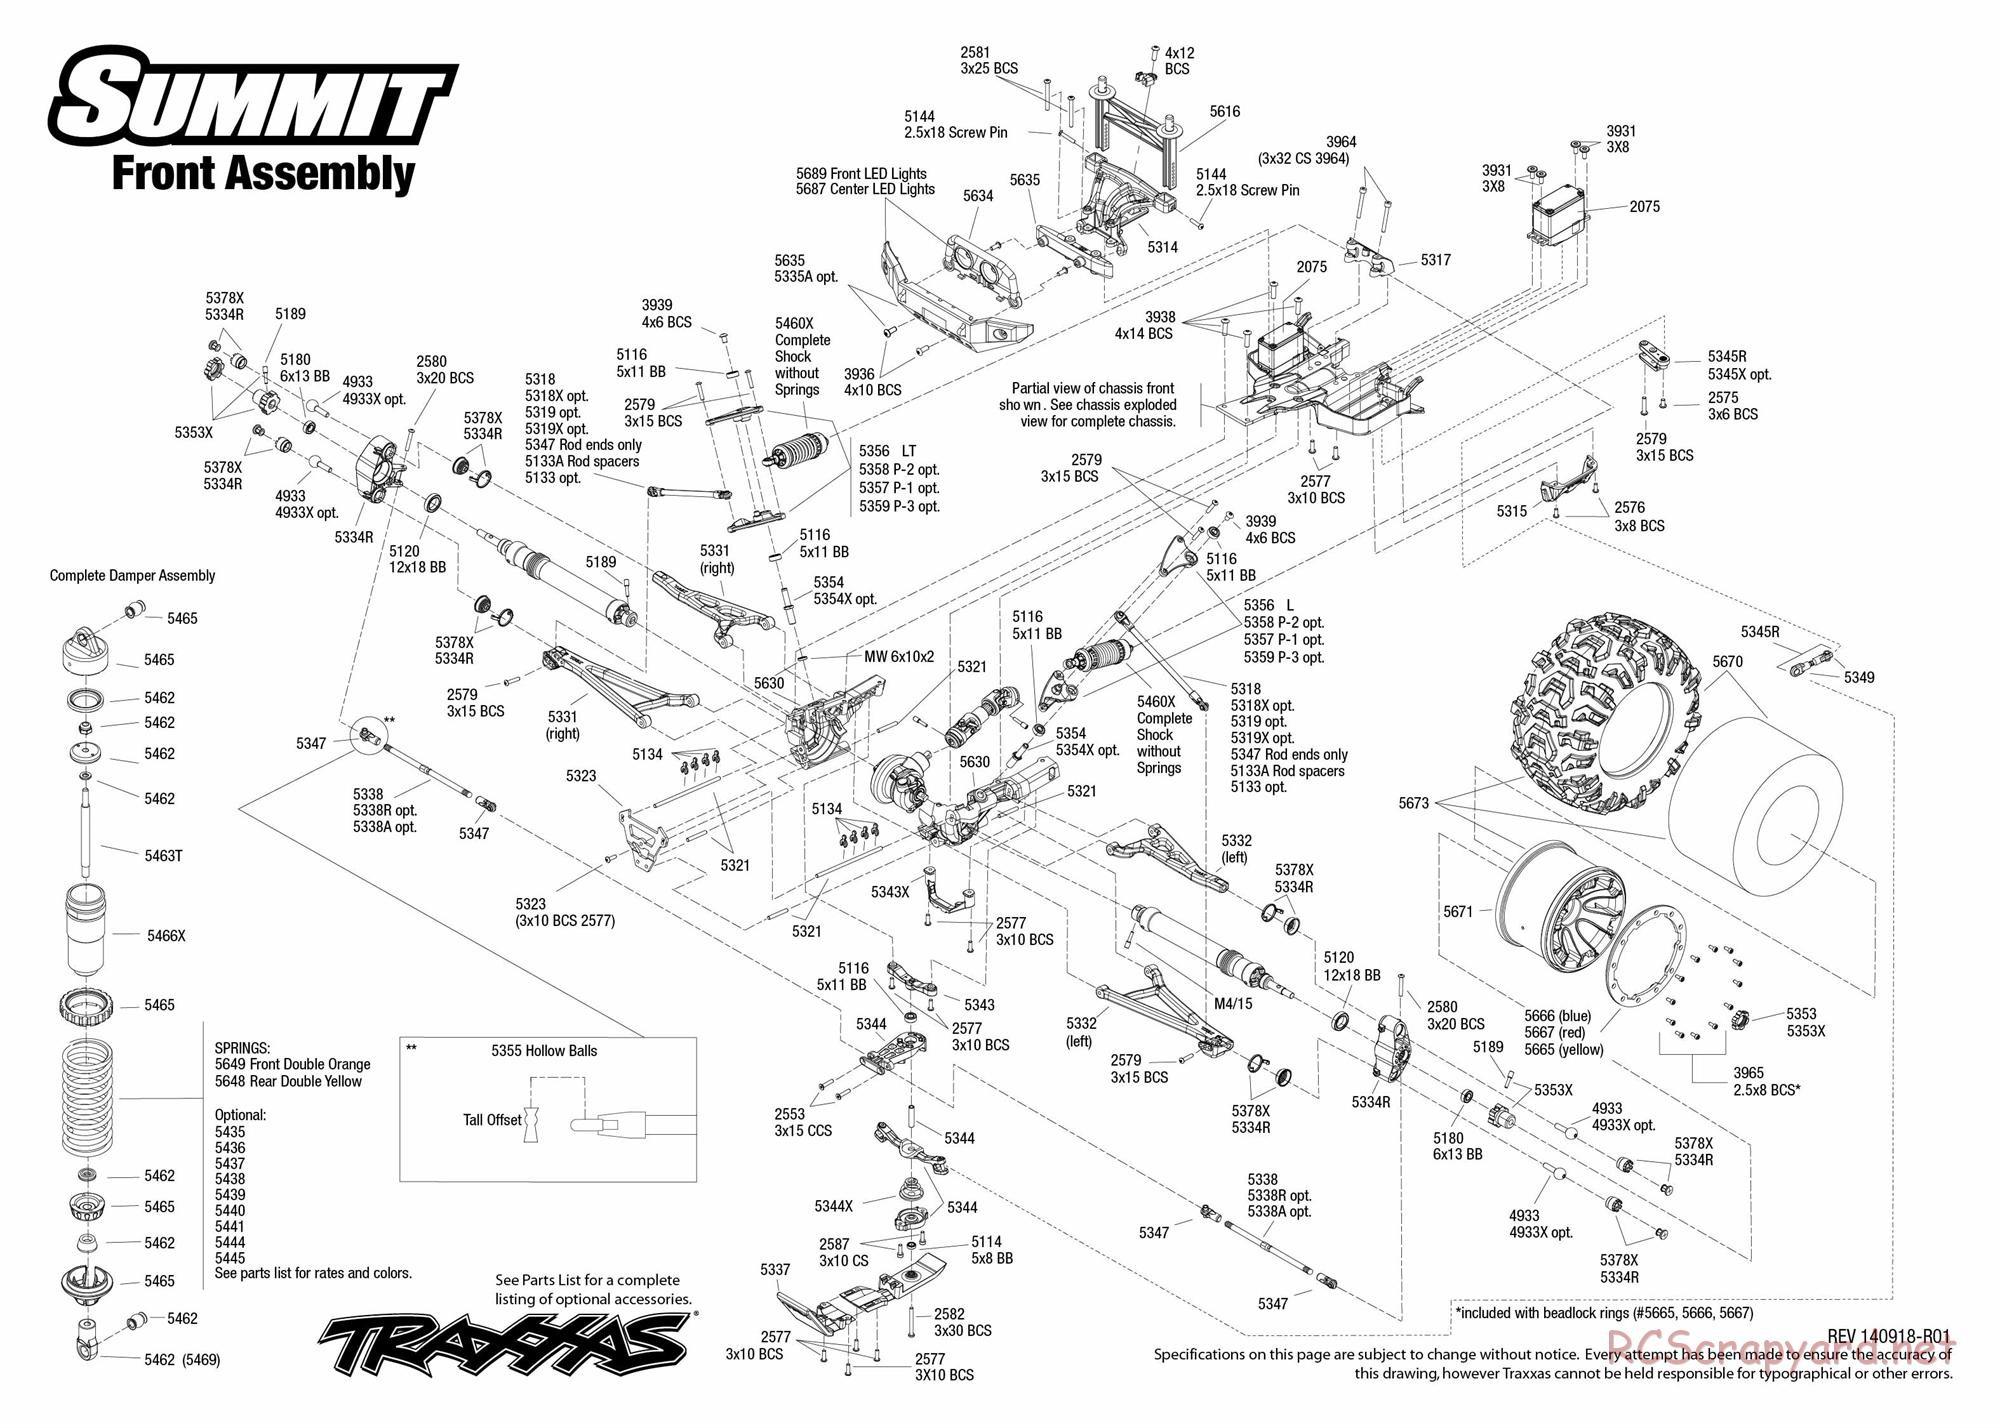 Traxxas - Summit (2014) - Exploded Views - Page 2